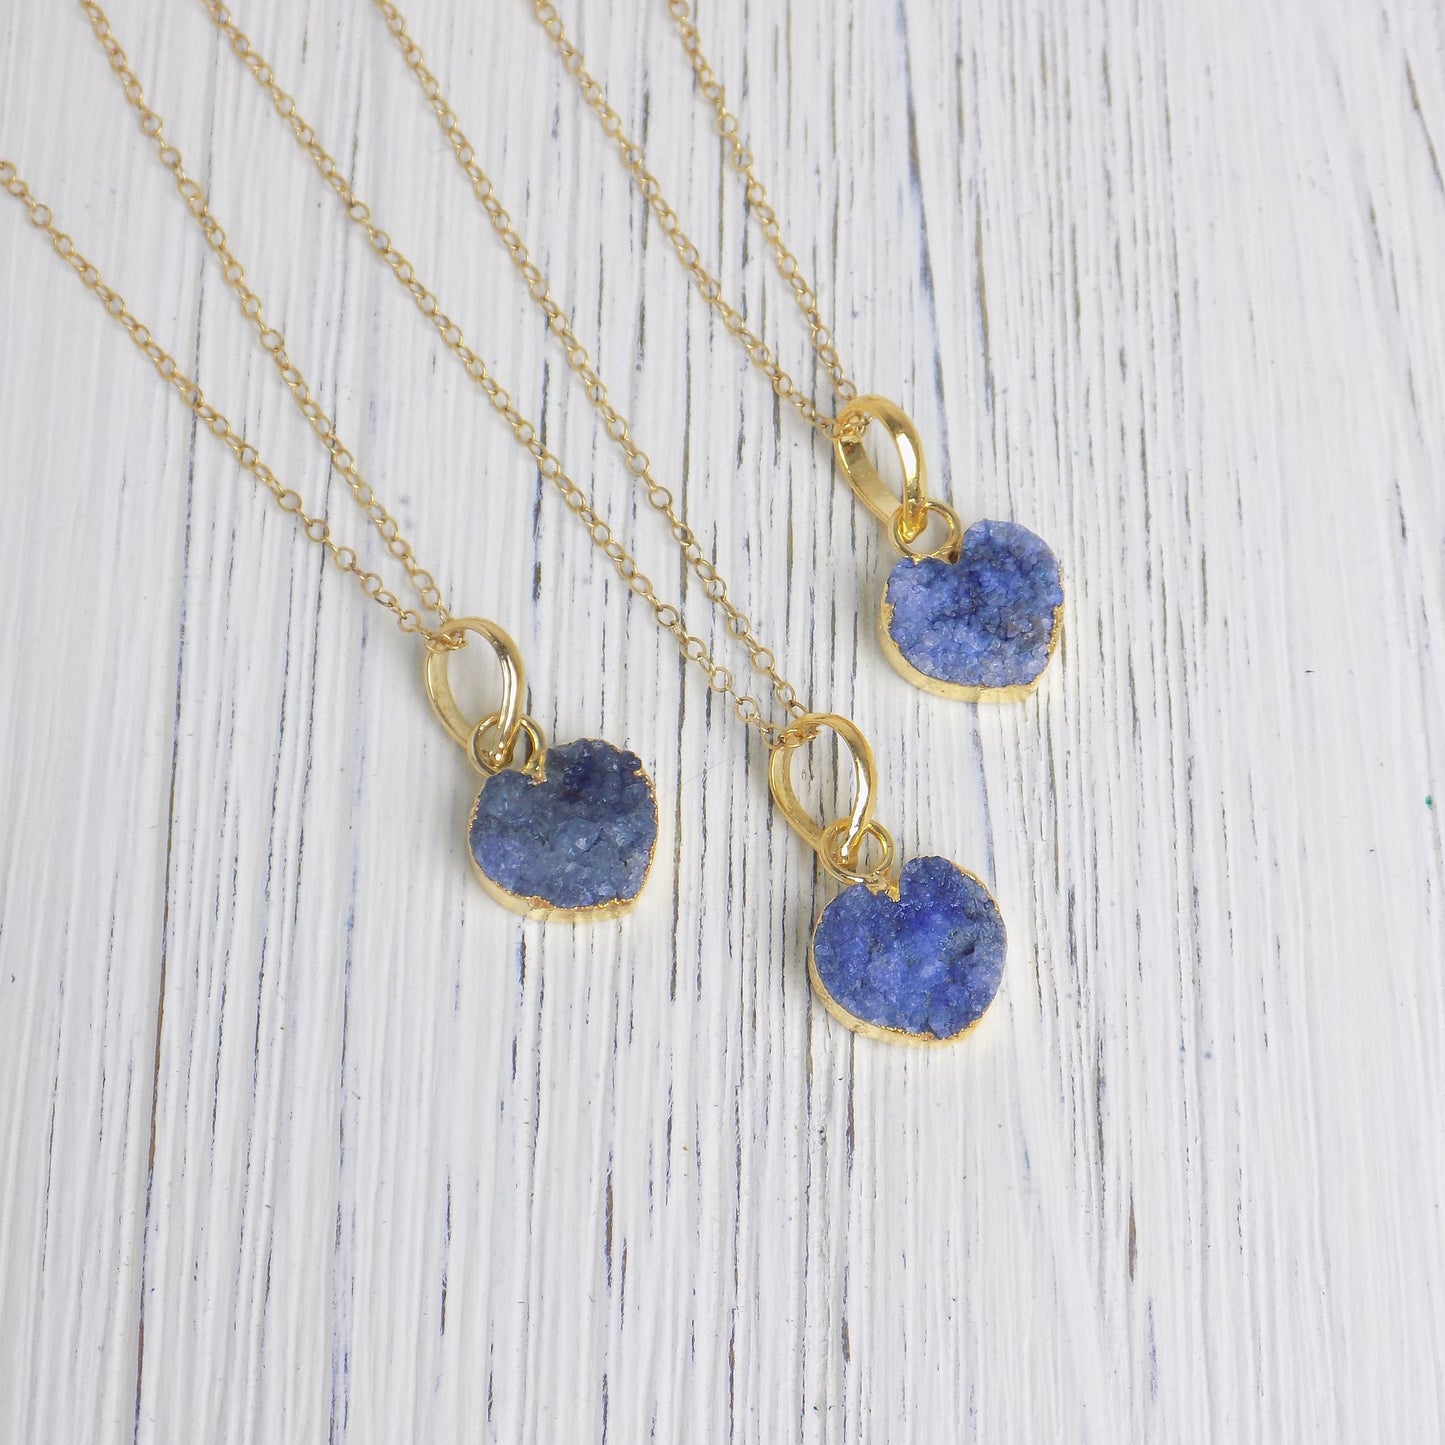 Heart Crystal Necklace, Blue Druzy Pendant, Gift For Her, M6-161